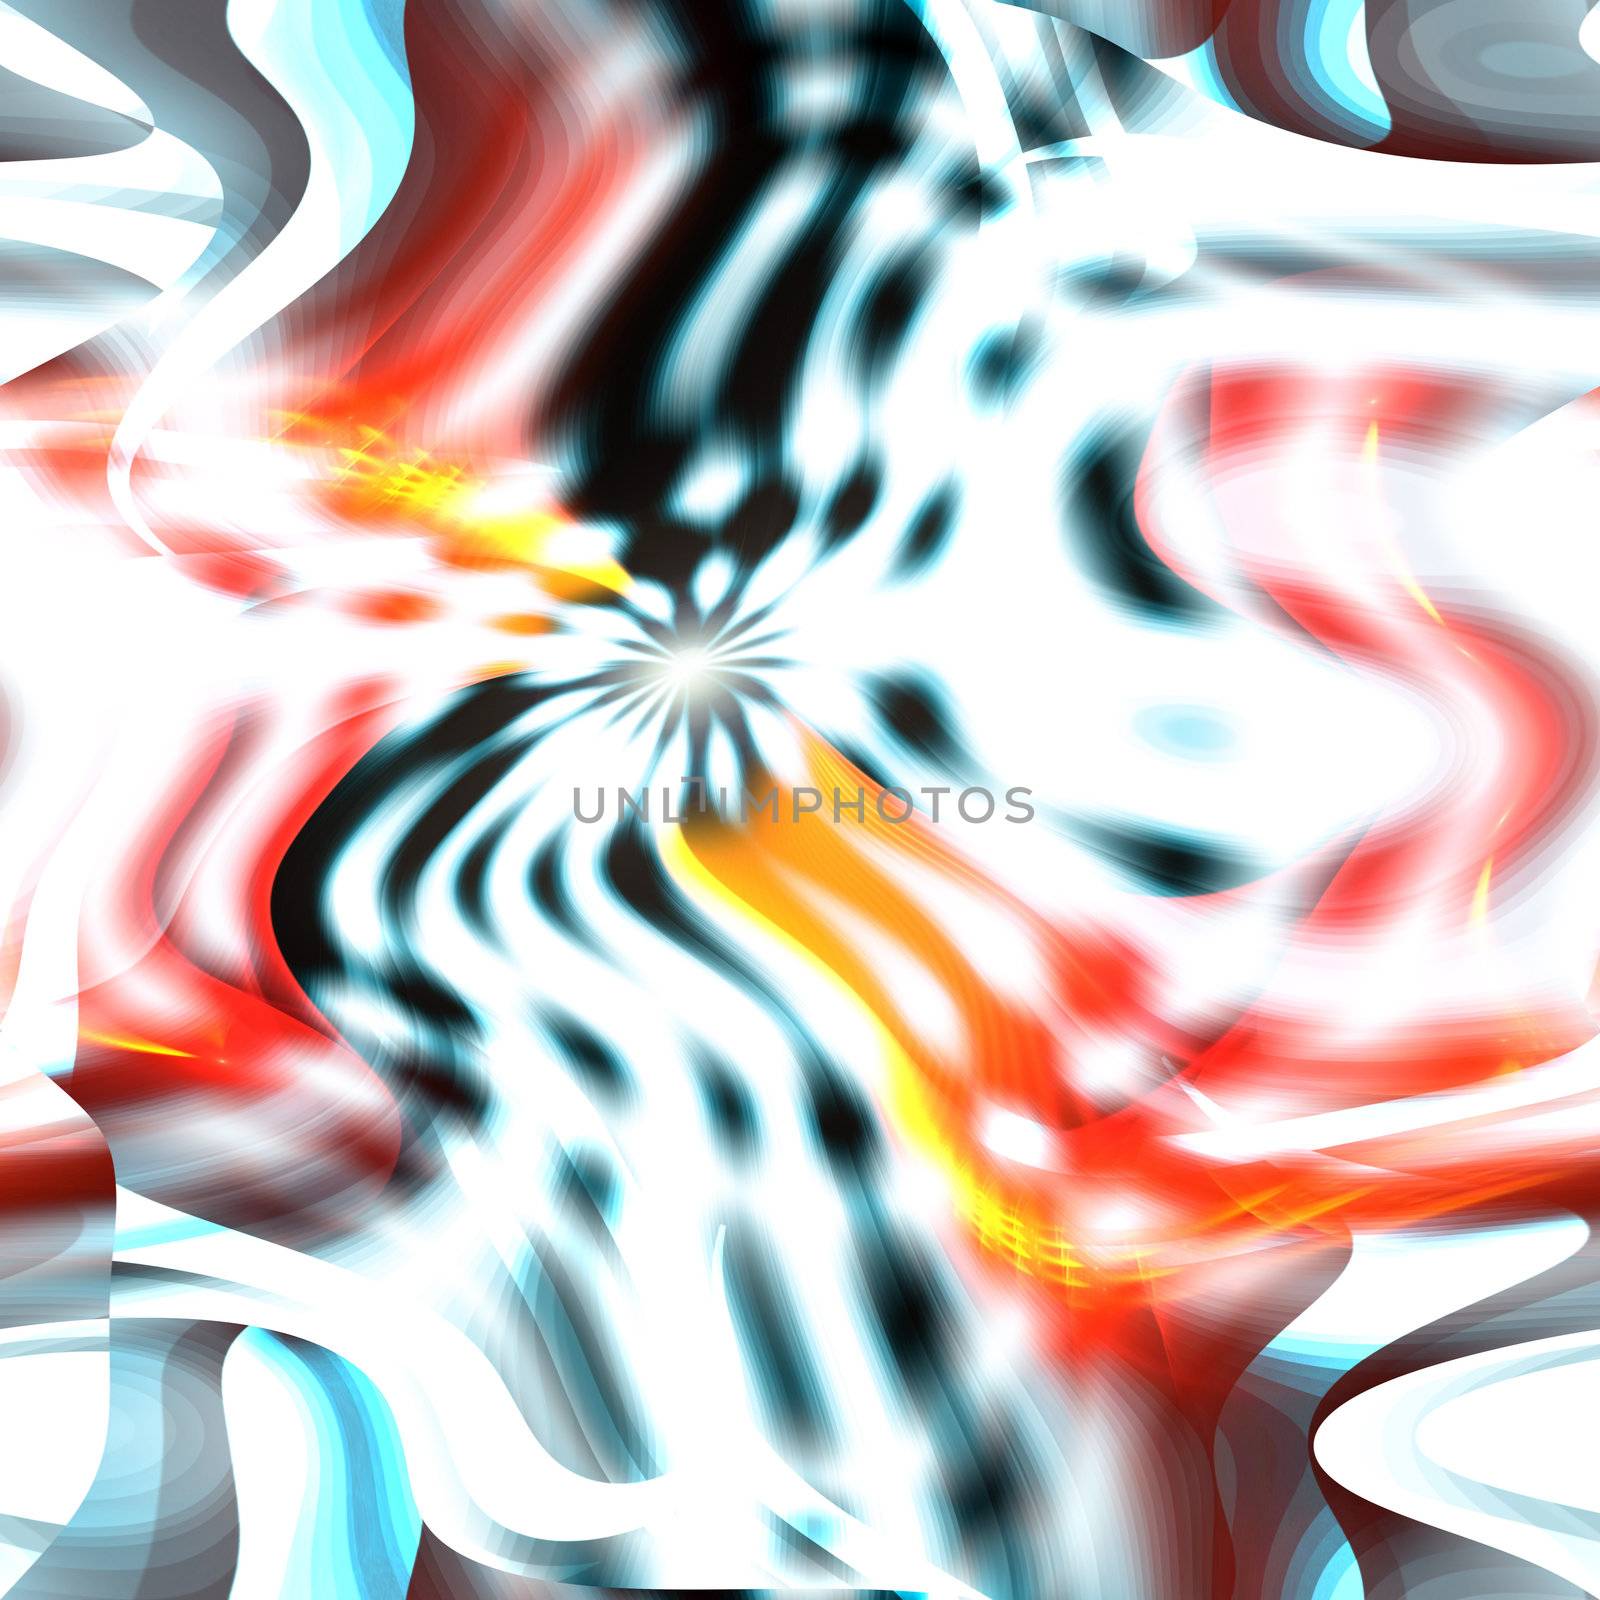 A bright abstract vortex illustration that radiates from the center.